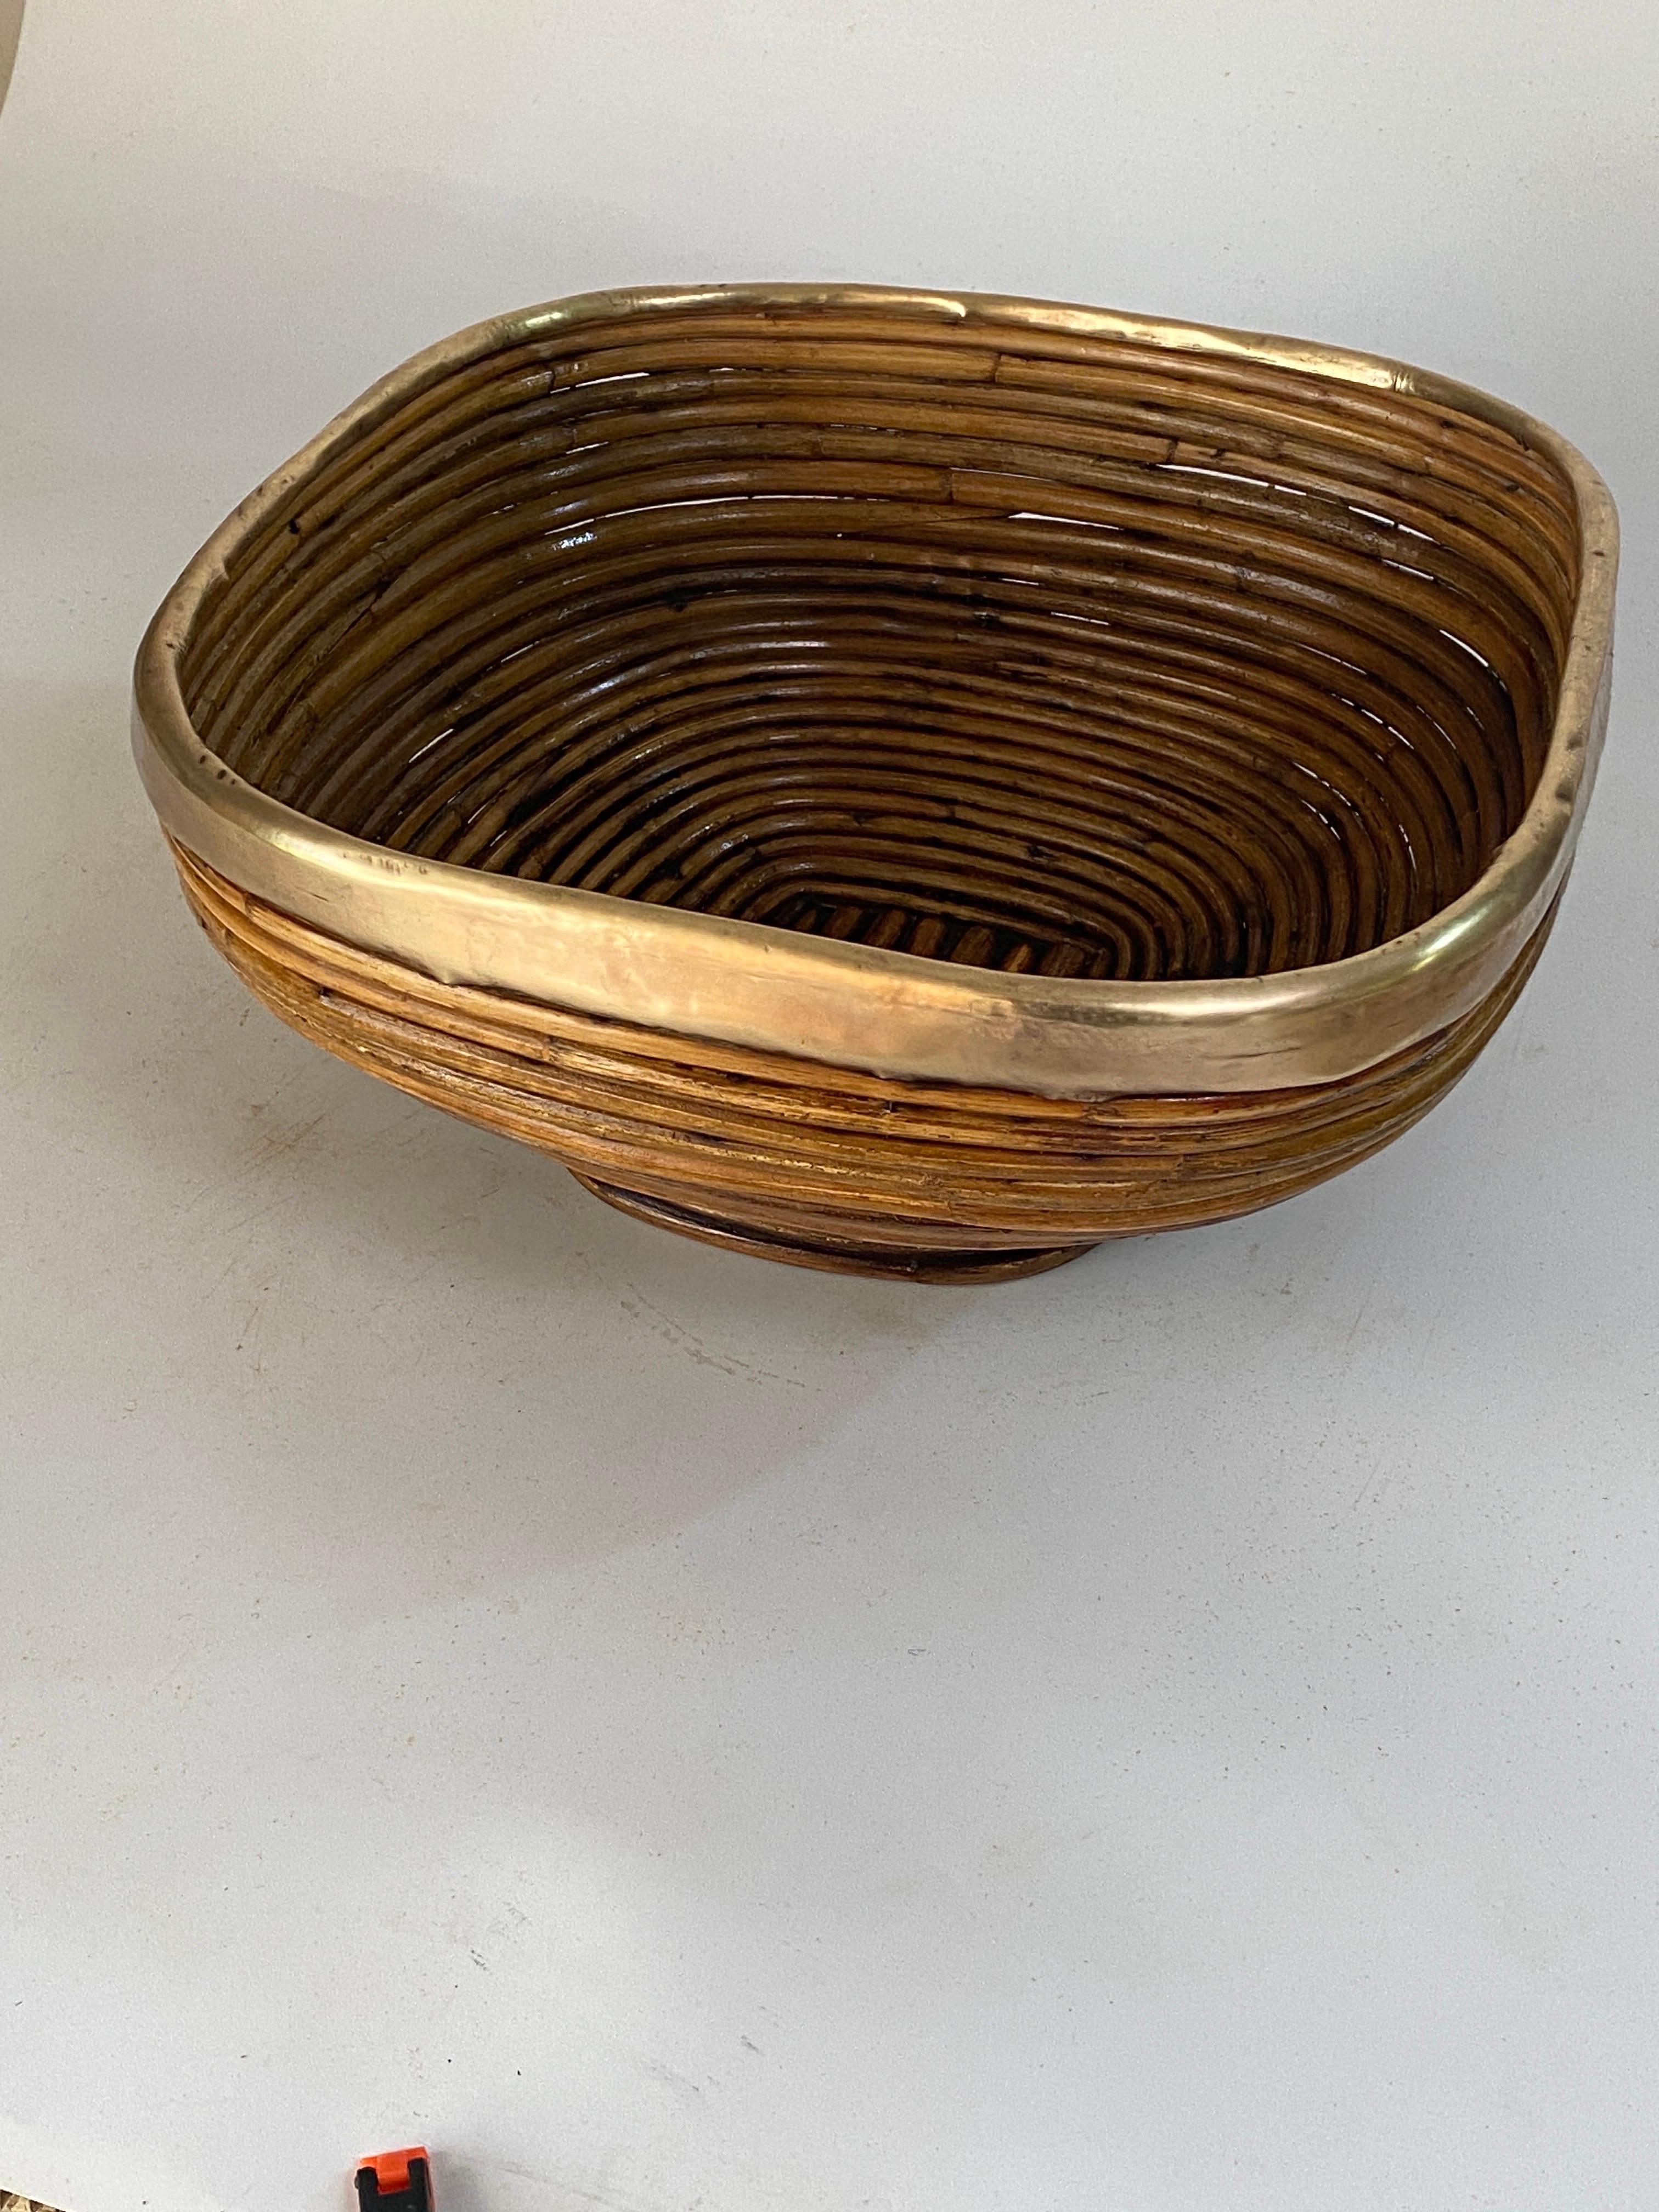 Rattan and Brass Italian Large Basket Bowl Centerpiece, 1970s Crespi Style For Sale 4